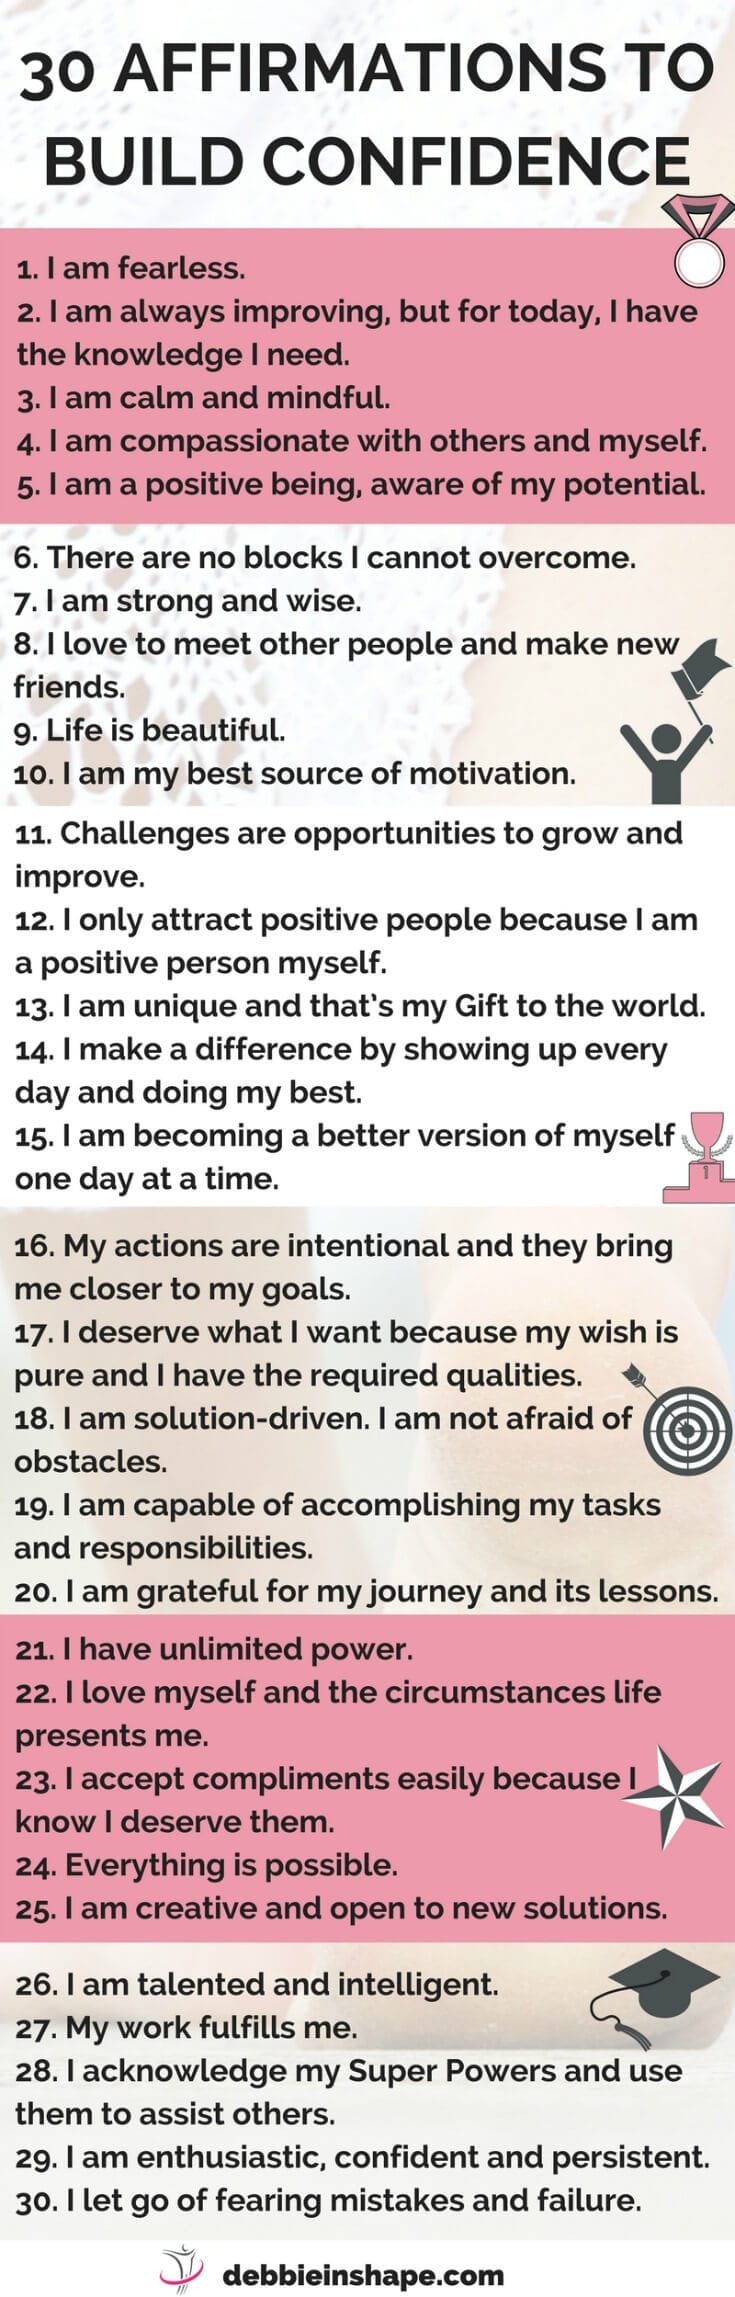 For positive women affirmations Free Affirmations